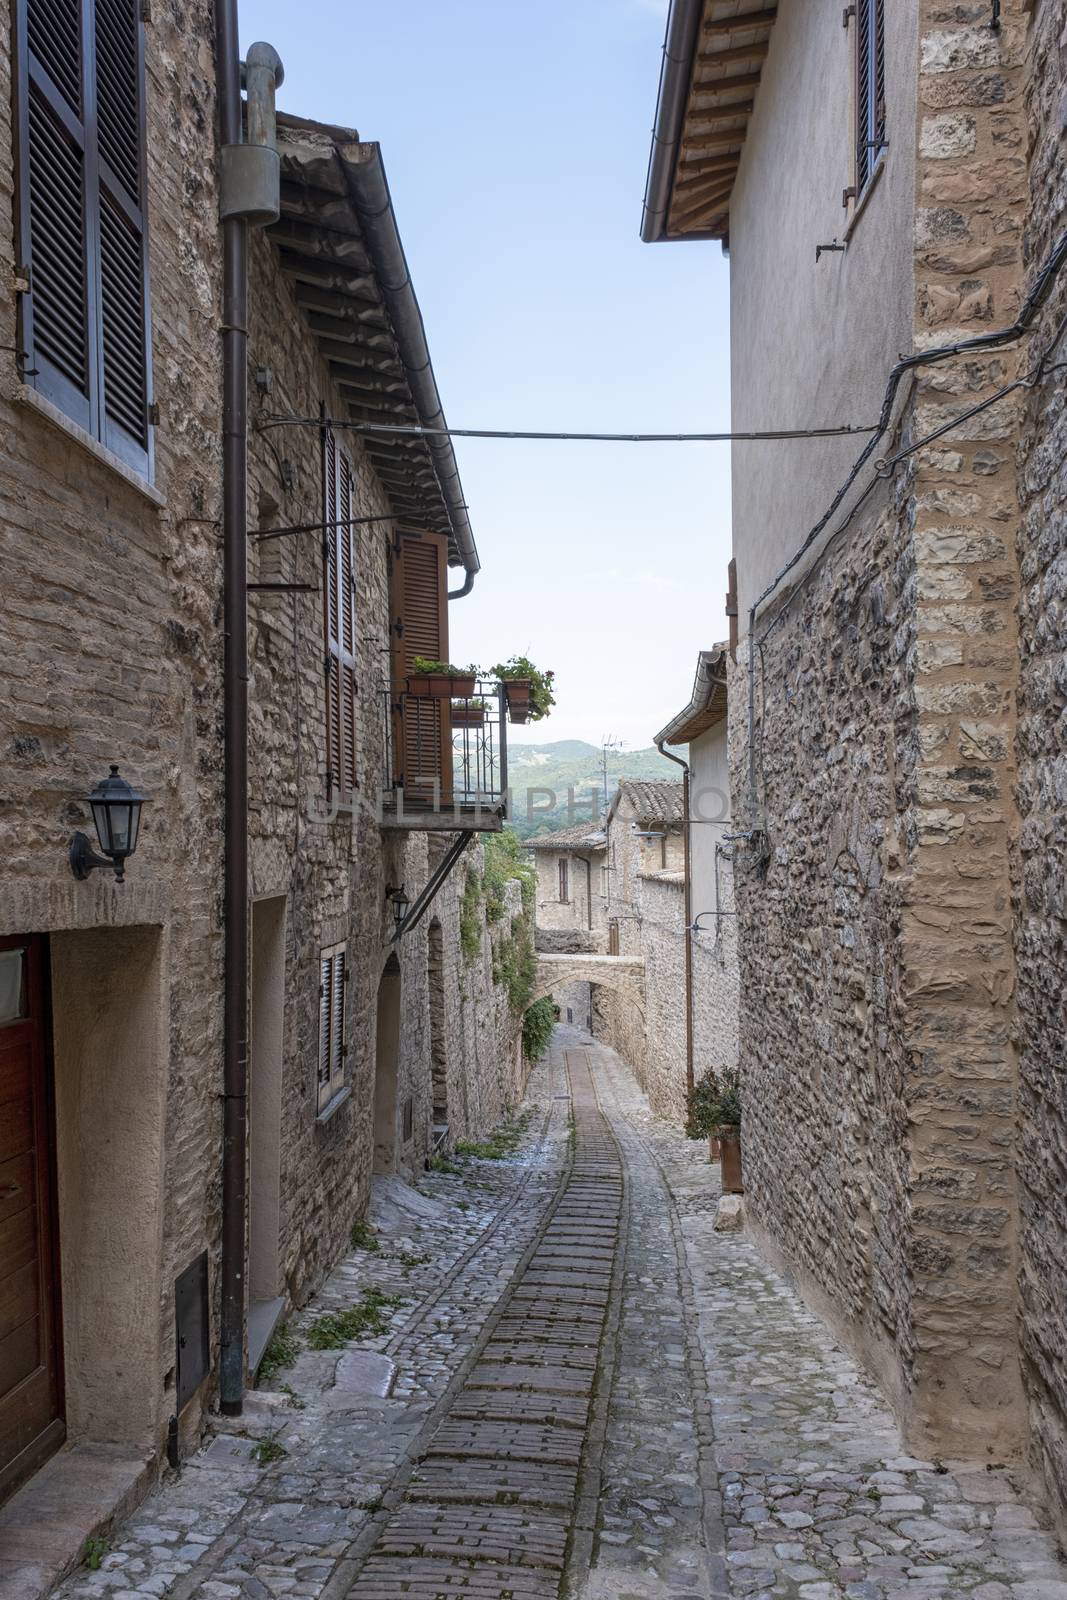 Typical street of Toscany, Italy. by Tjeerdkruse